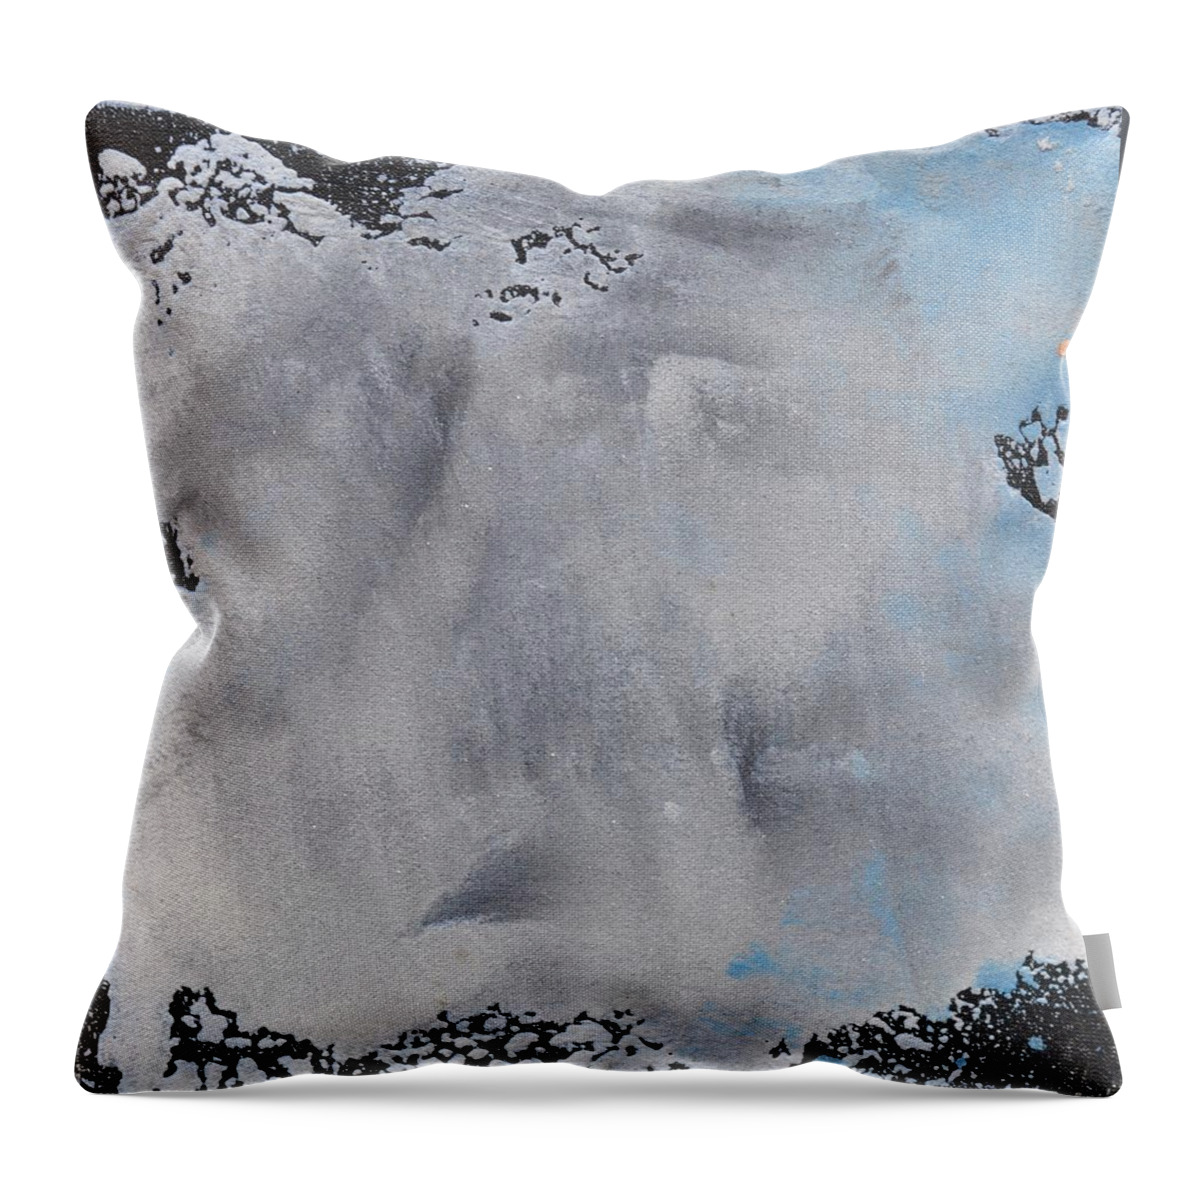 Abstract Throw Pillow featuring the painting Sand Tile 214141 by Eduard Meinema